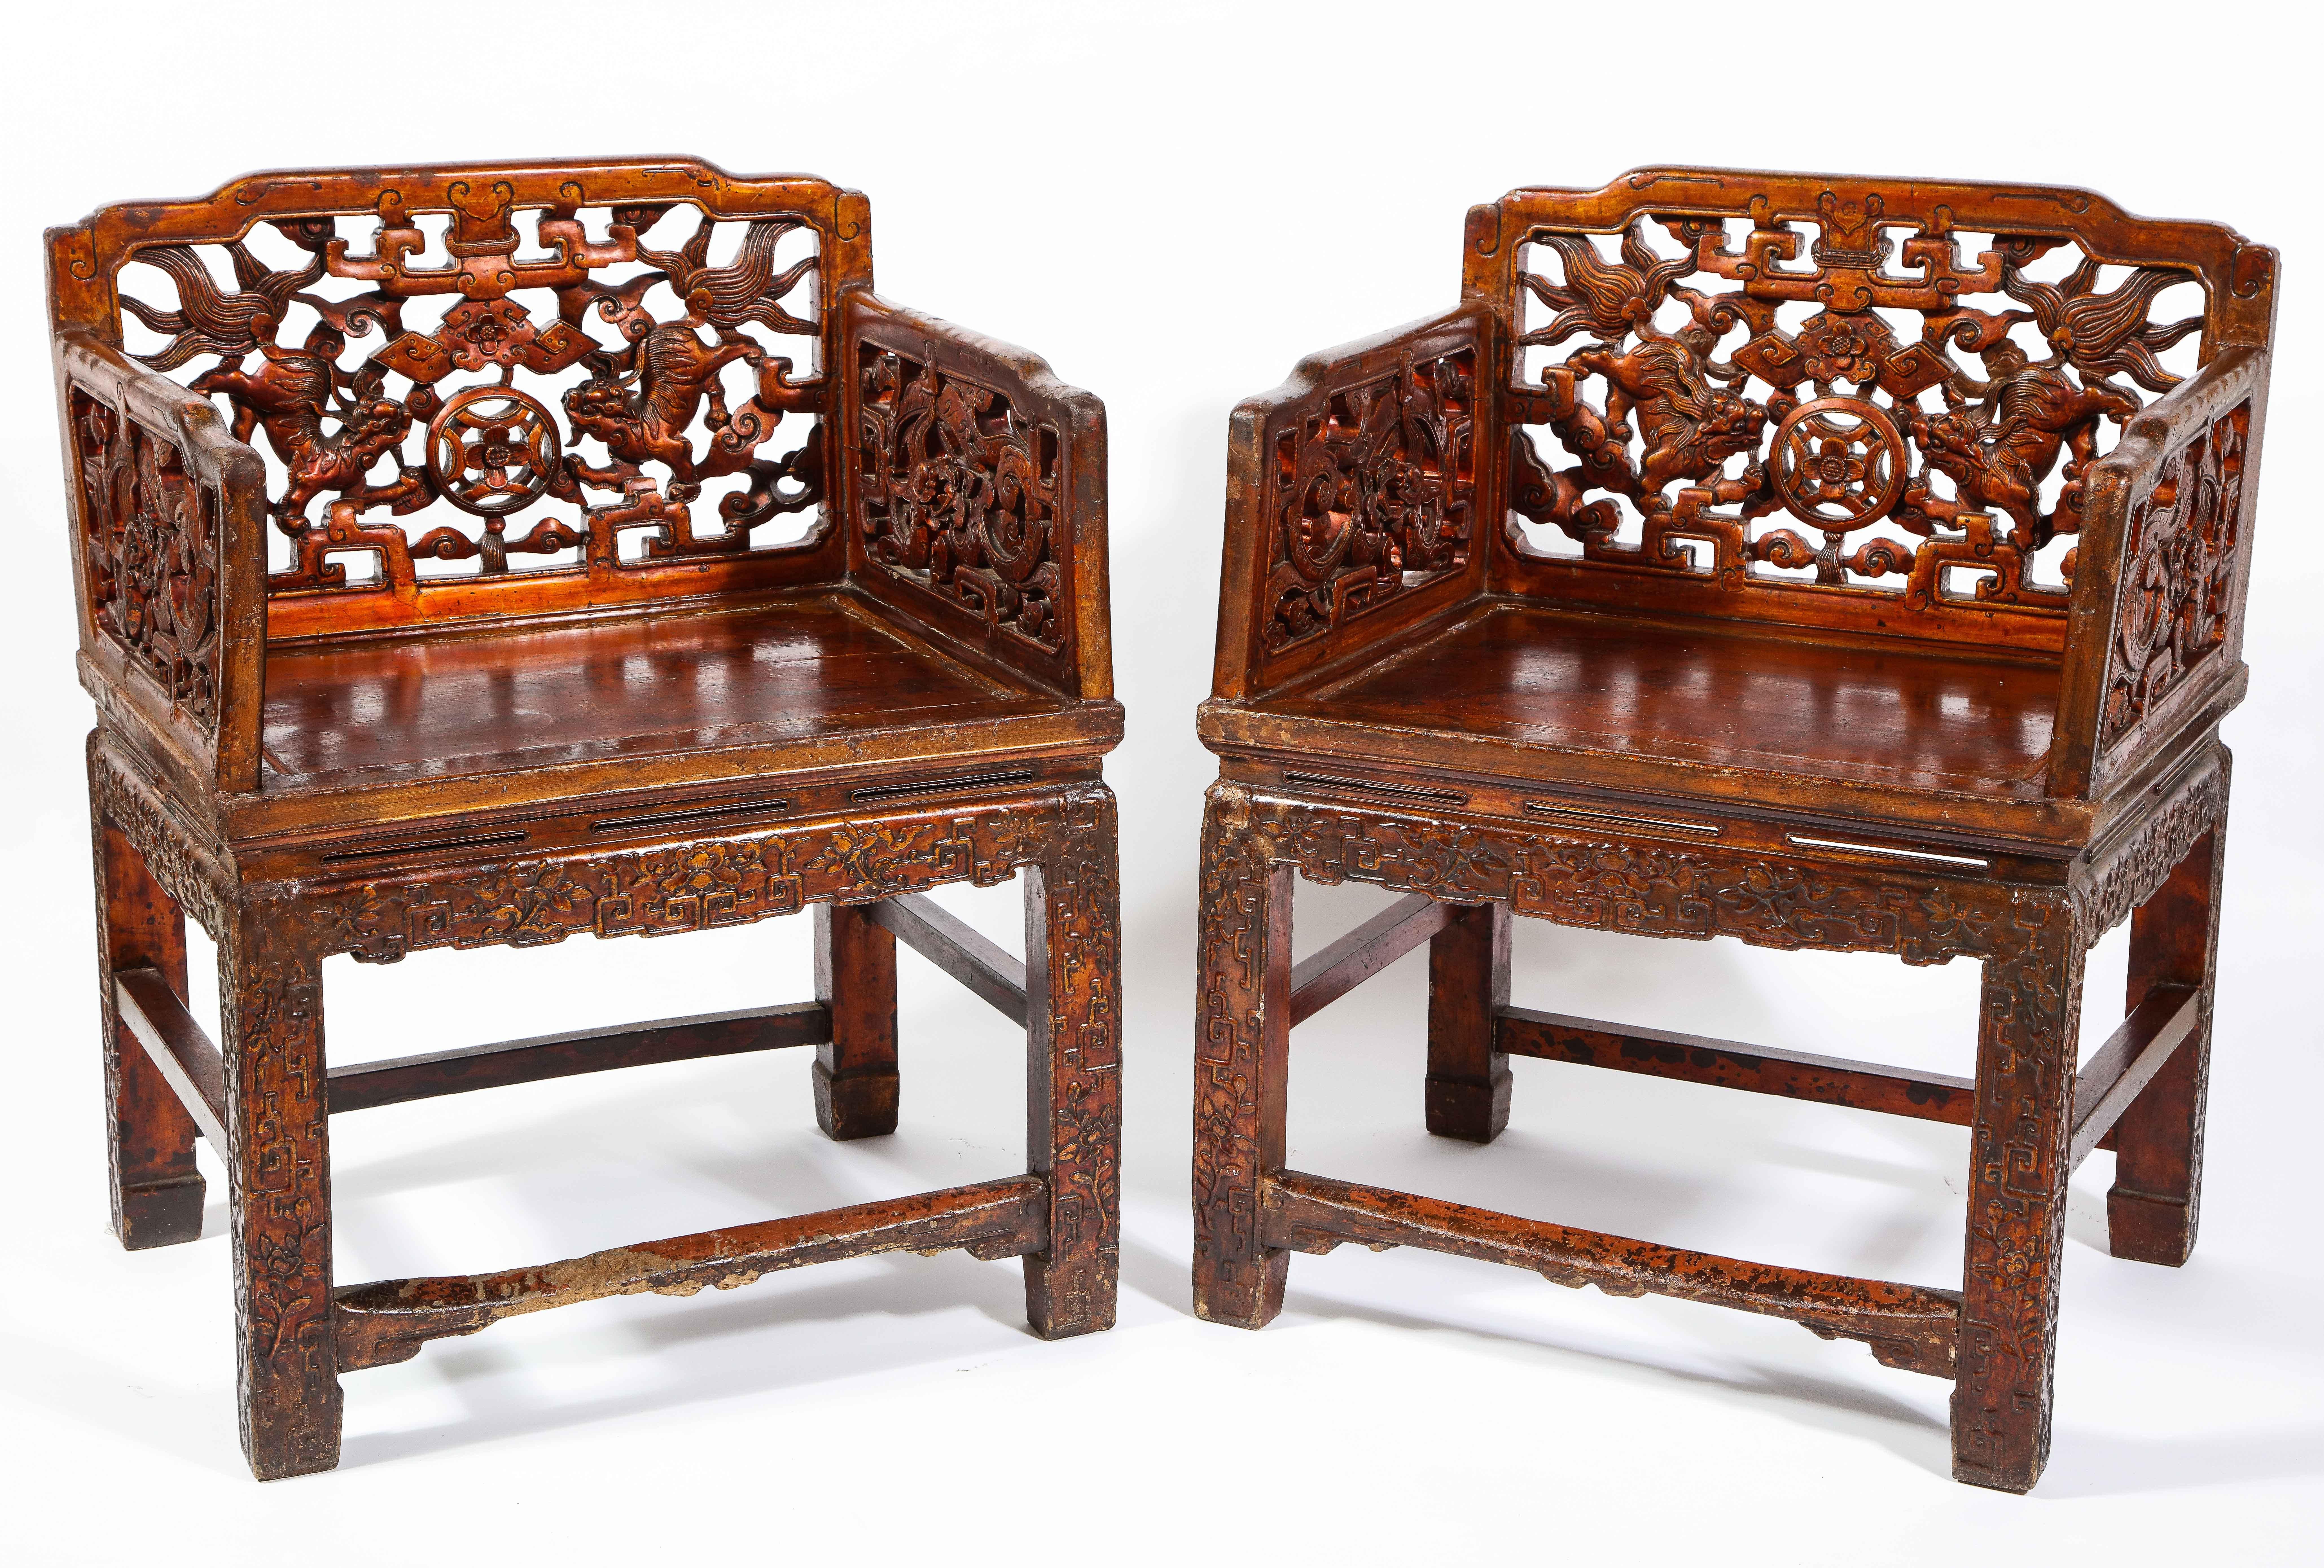 An exceptional and large pair of Qing Dynasty 19th century Chinese lacquered hardwood open work throne chairs decorated with dragons, foo lions, flowers, and vines. Each throne chair is exceptionally hand-carved with meticulous detail and